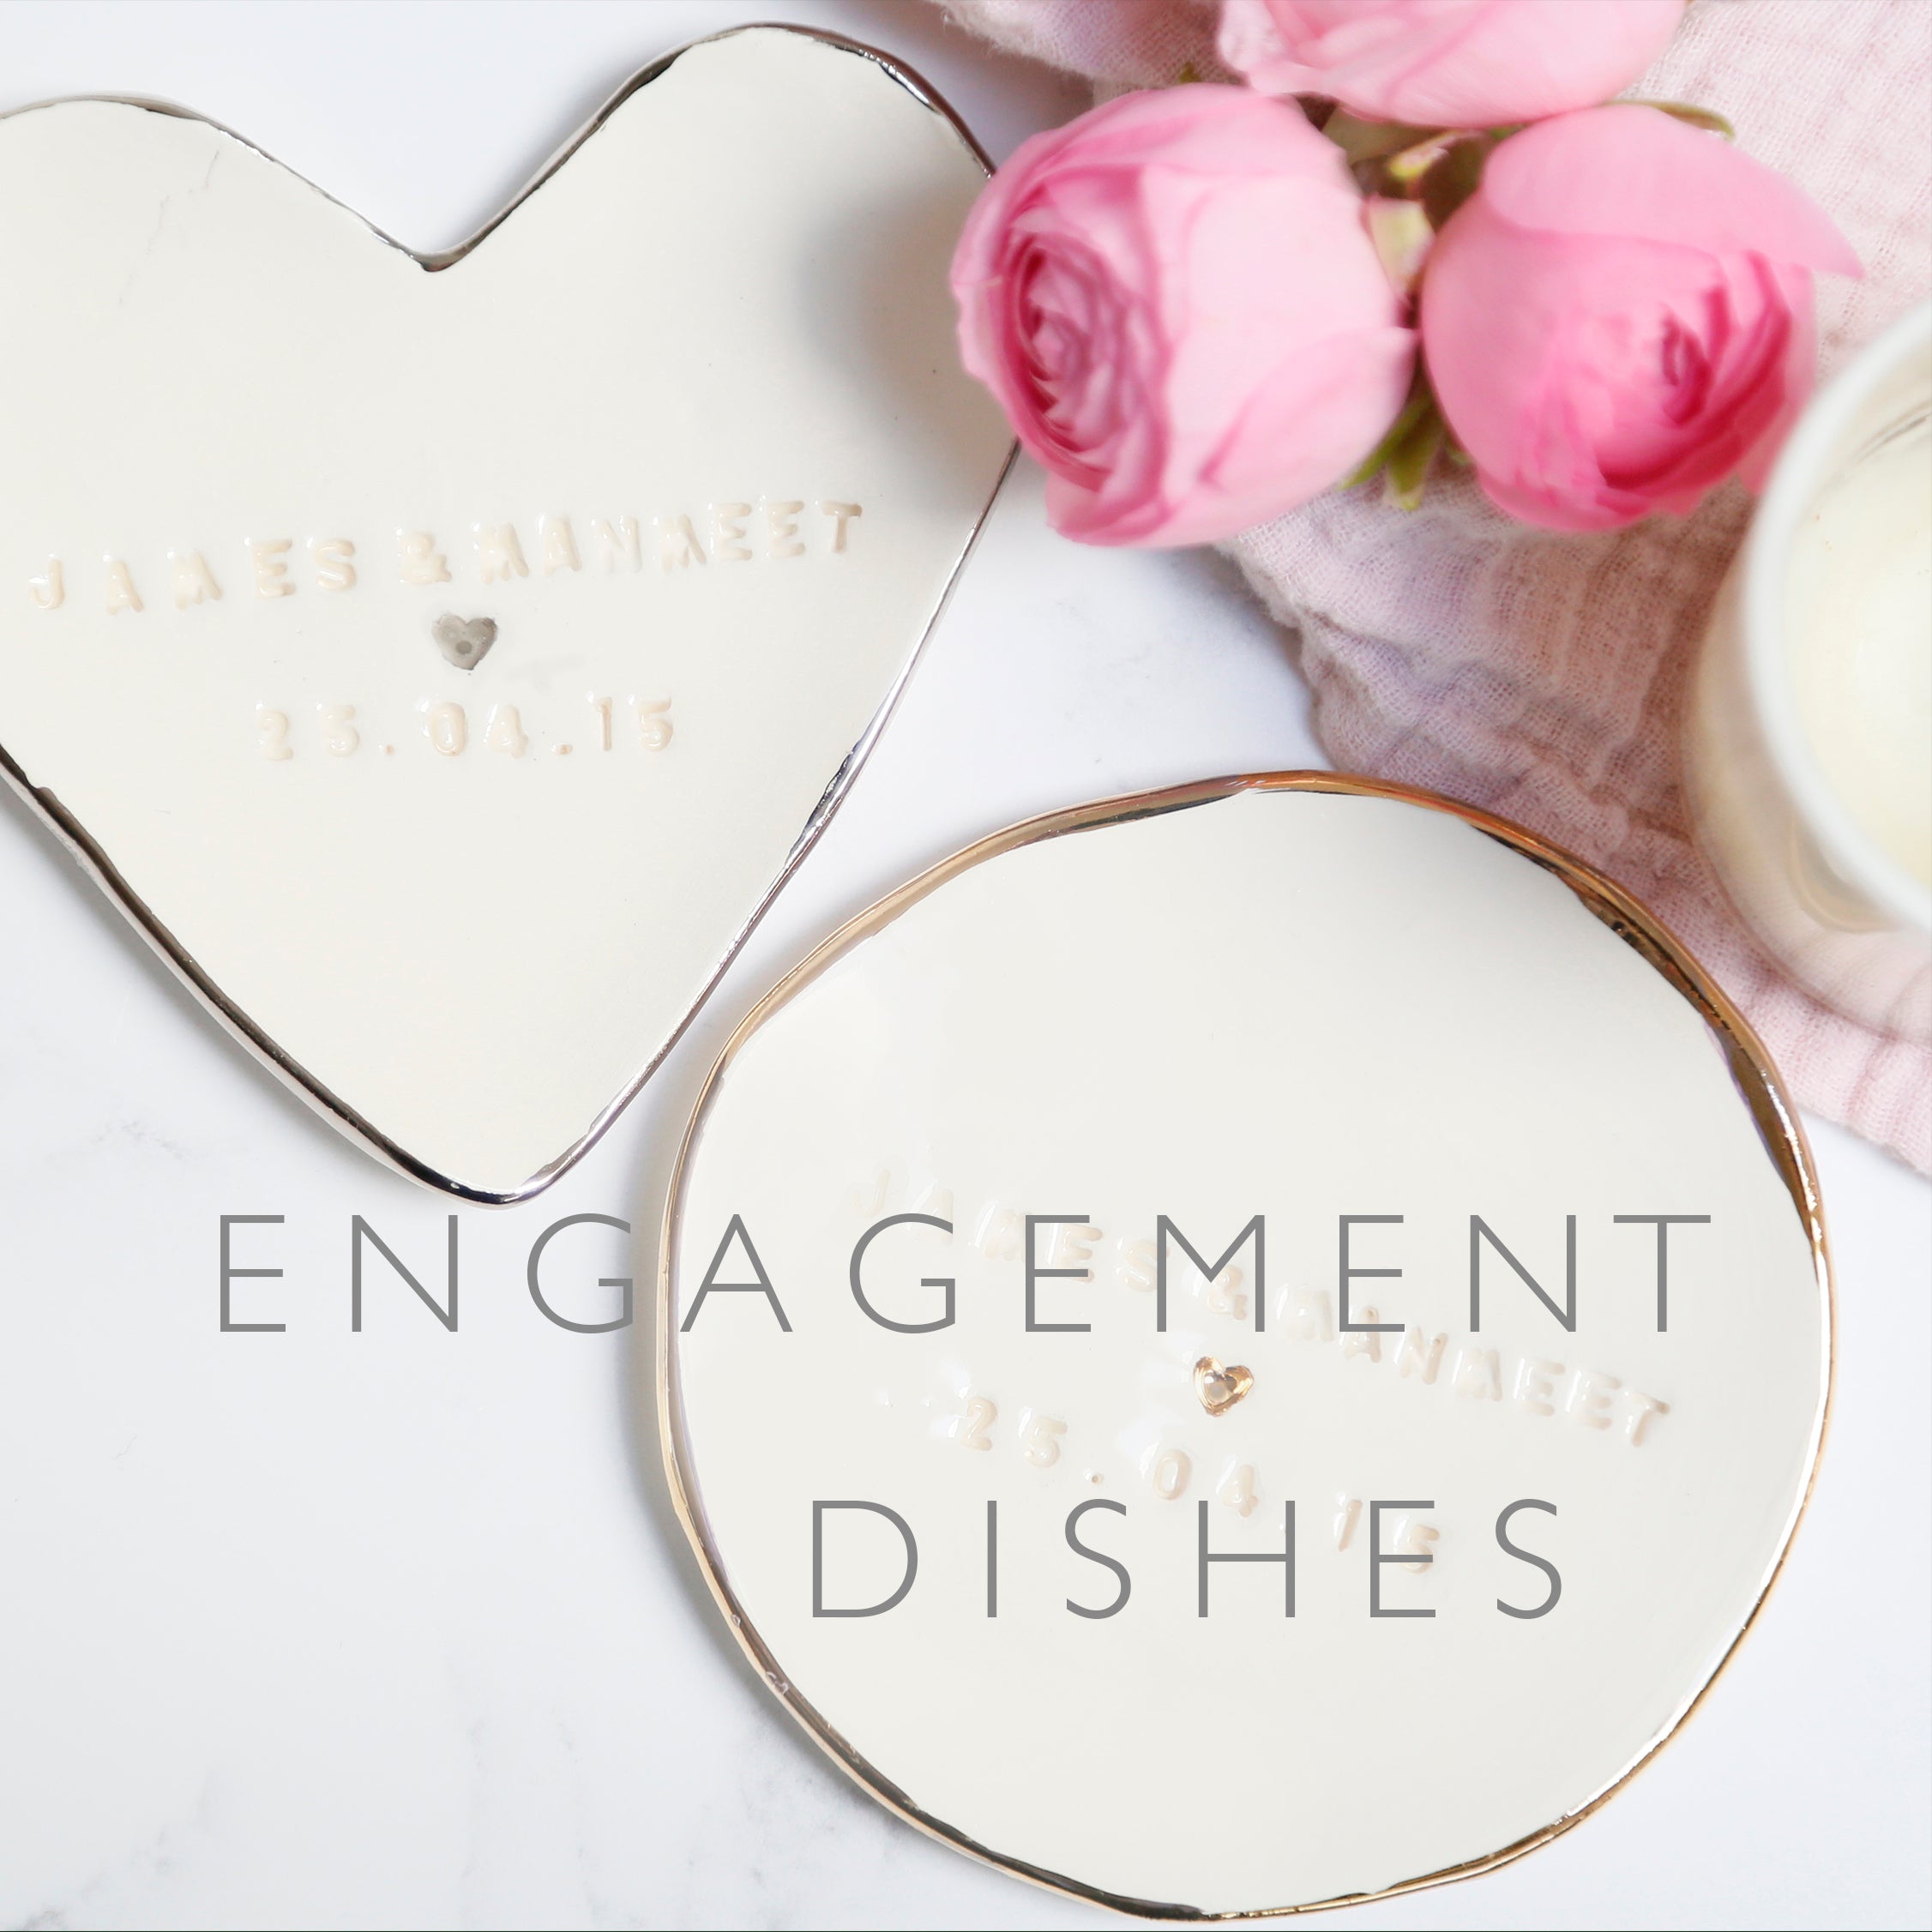 Engagement Dishes